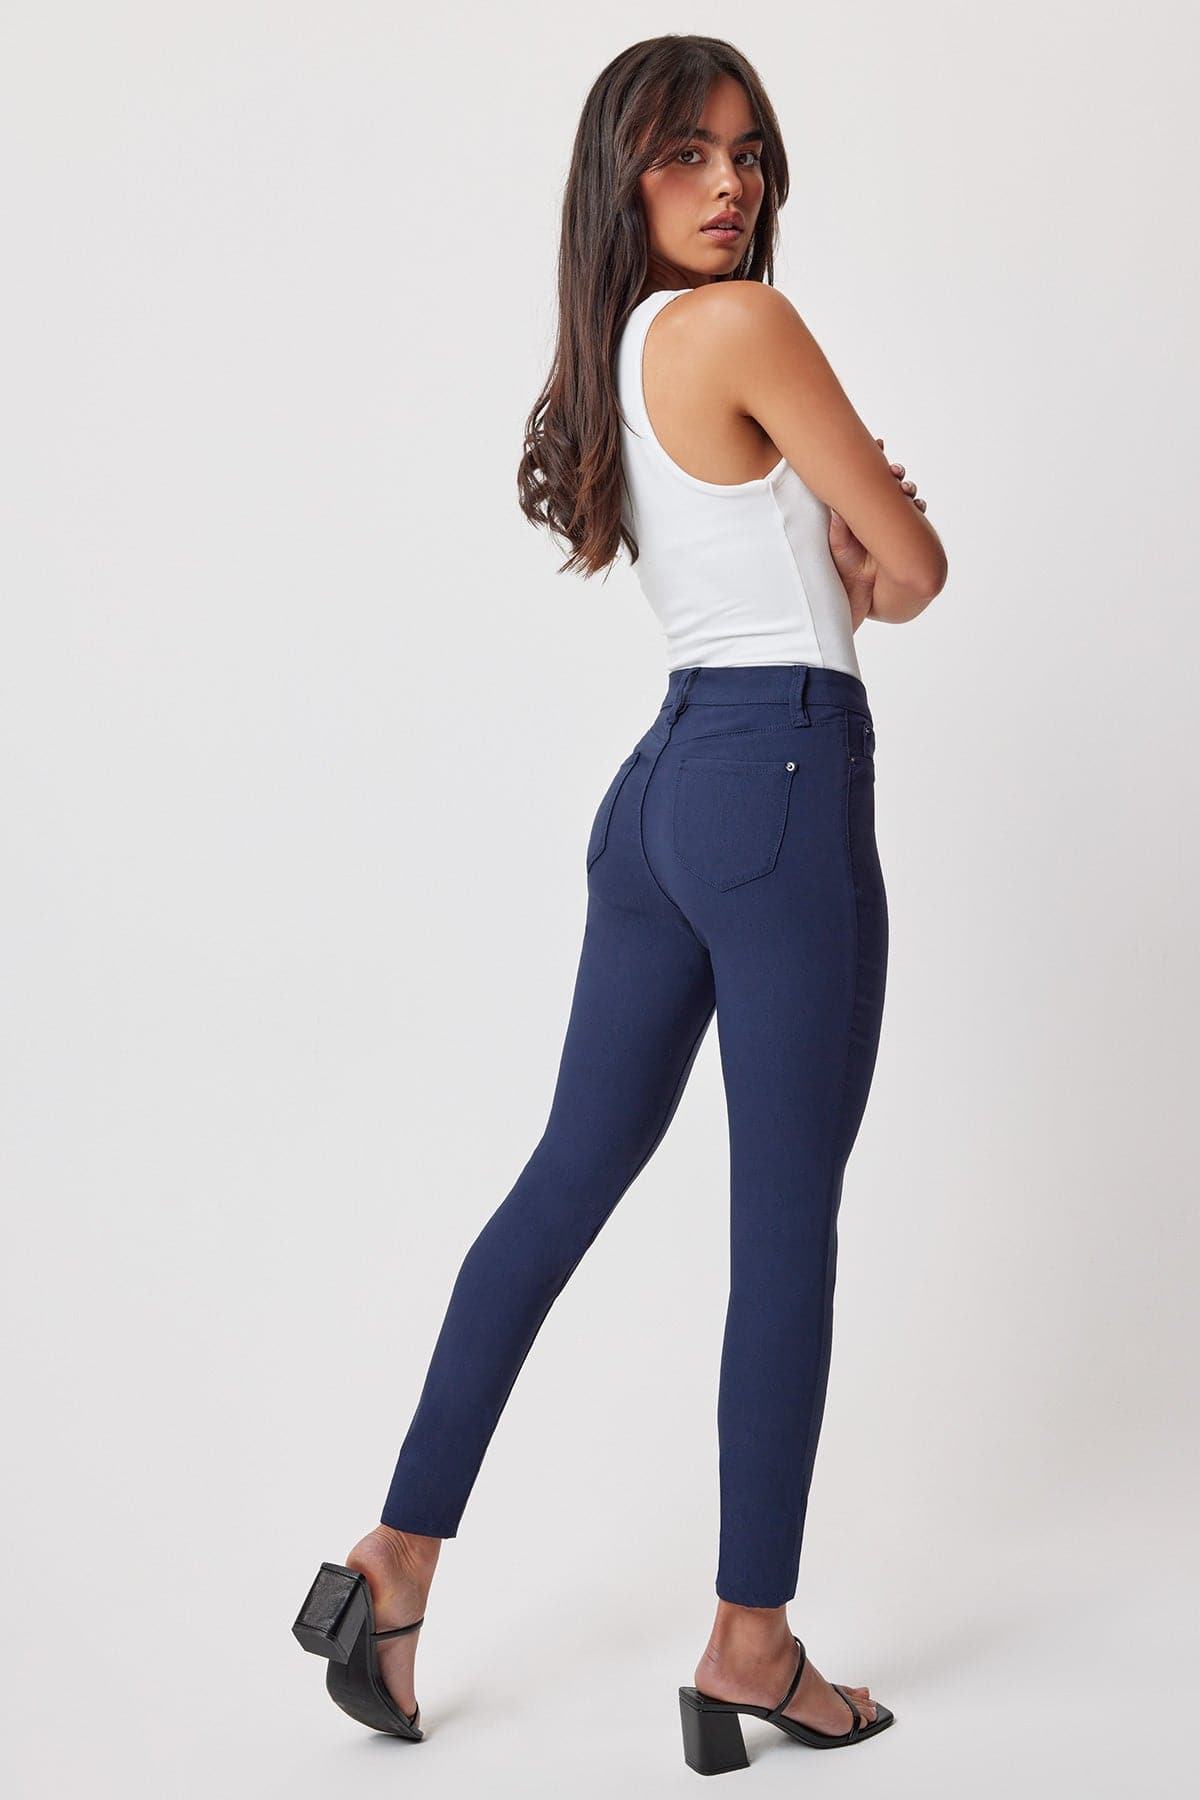 Women's Hyperstretch Forever Color Pants- Year Round